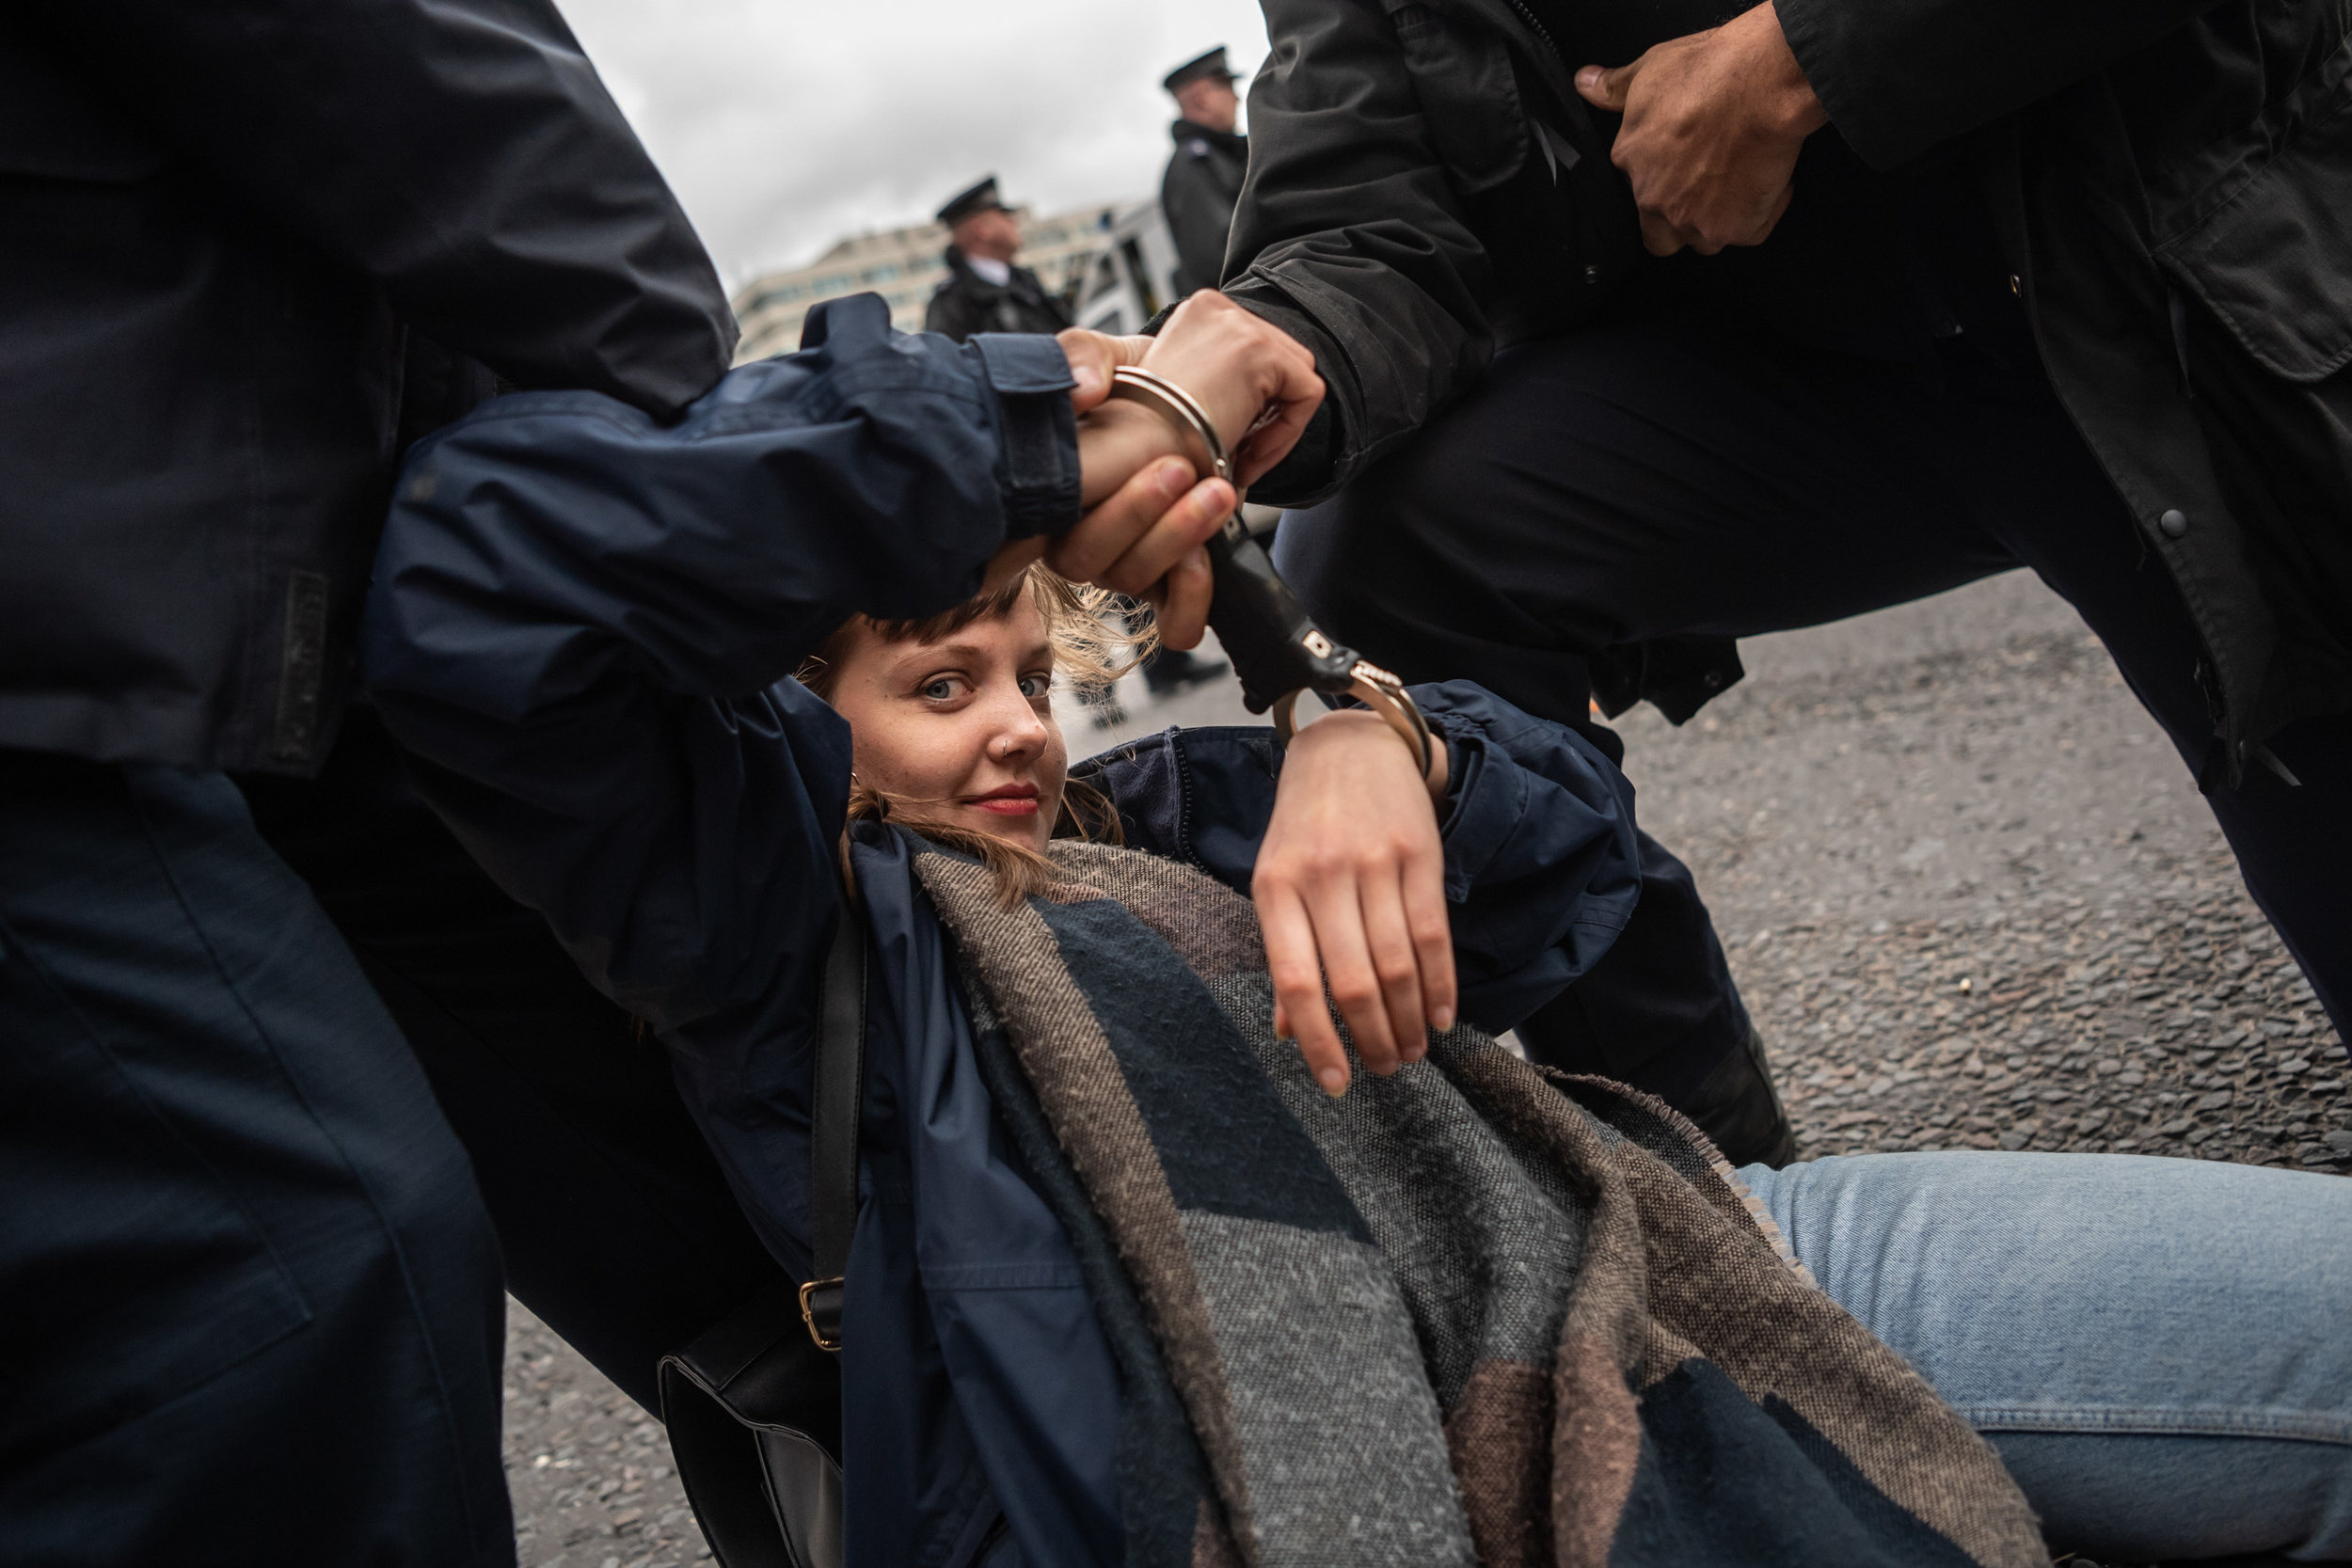  Emma, 18, one of two students arrested by police on Westminster Bridge at an �after party� following an international day of action by schoolchildren protesting inaction over climate change.
Photo by Guilhem Baker, 15 March 2019
 